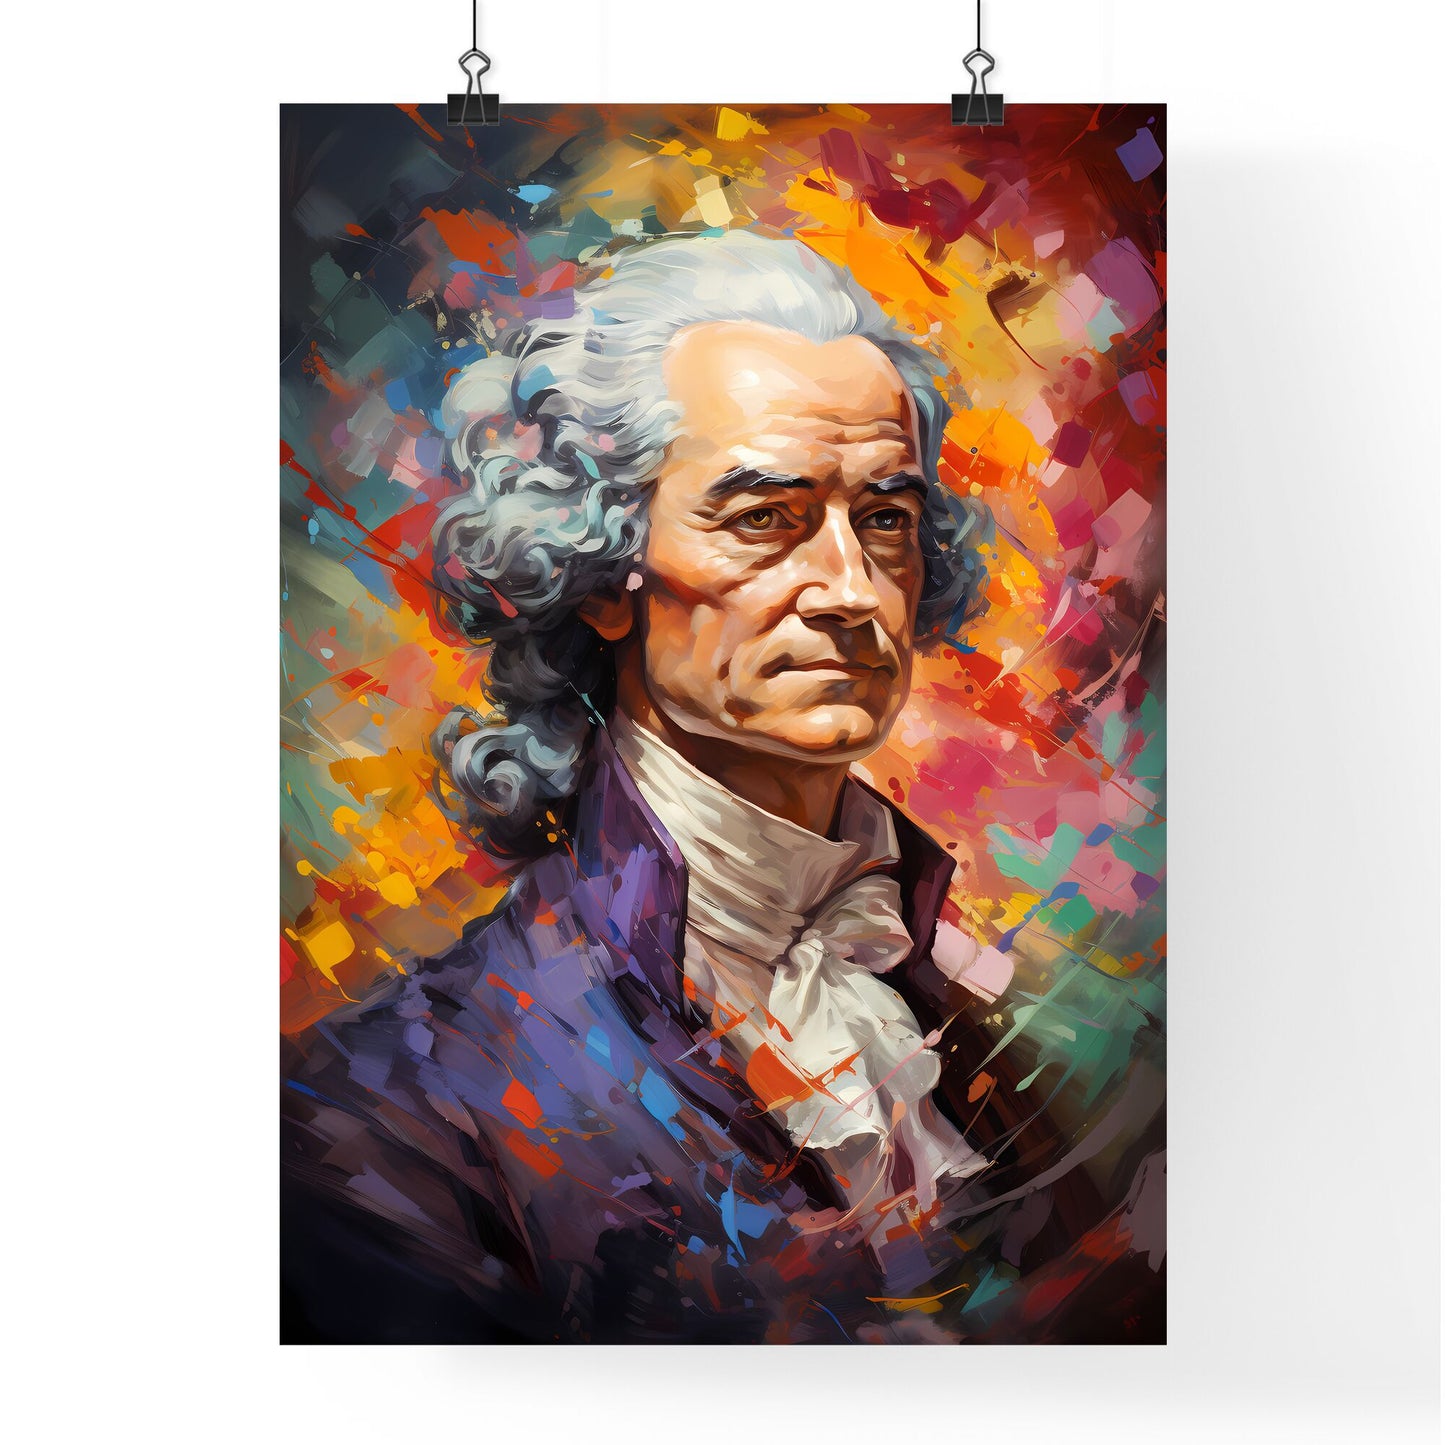 Voltaire French Enlightenment Writer Philosopher - A Painting Of A Man With A White Hair And A Blue Jacket Default Title